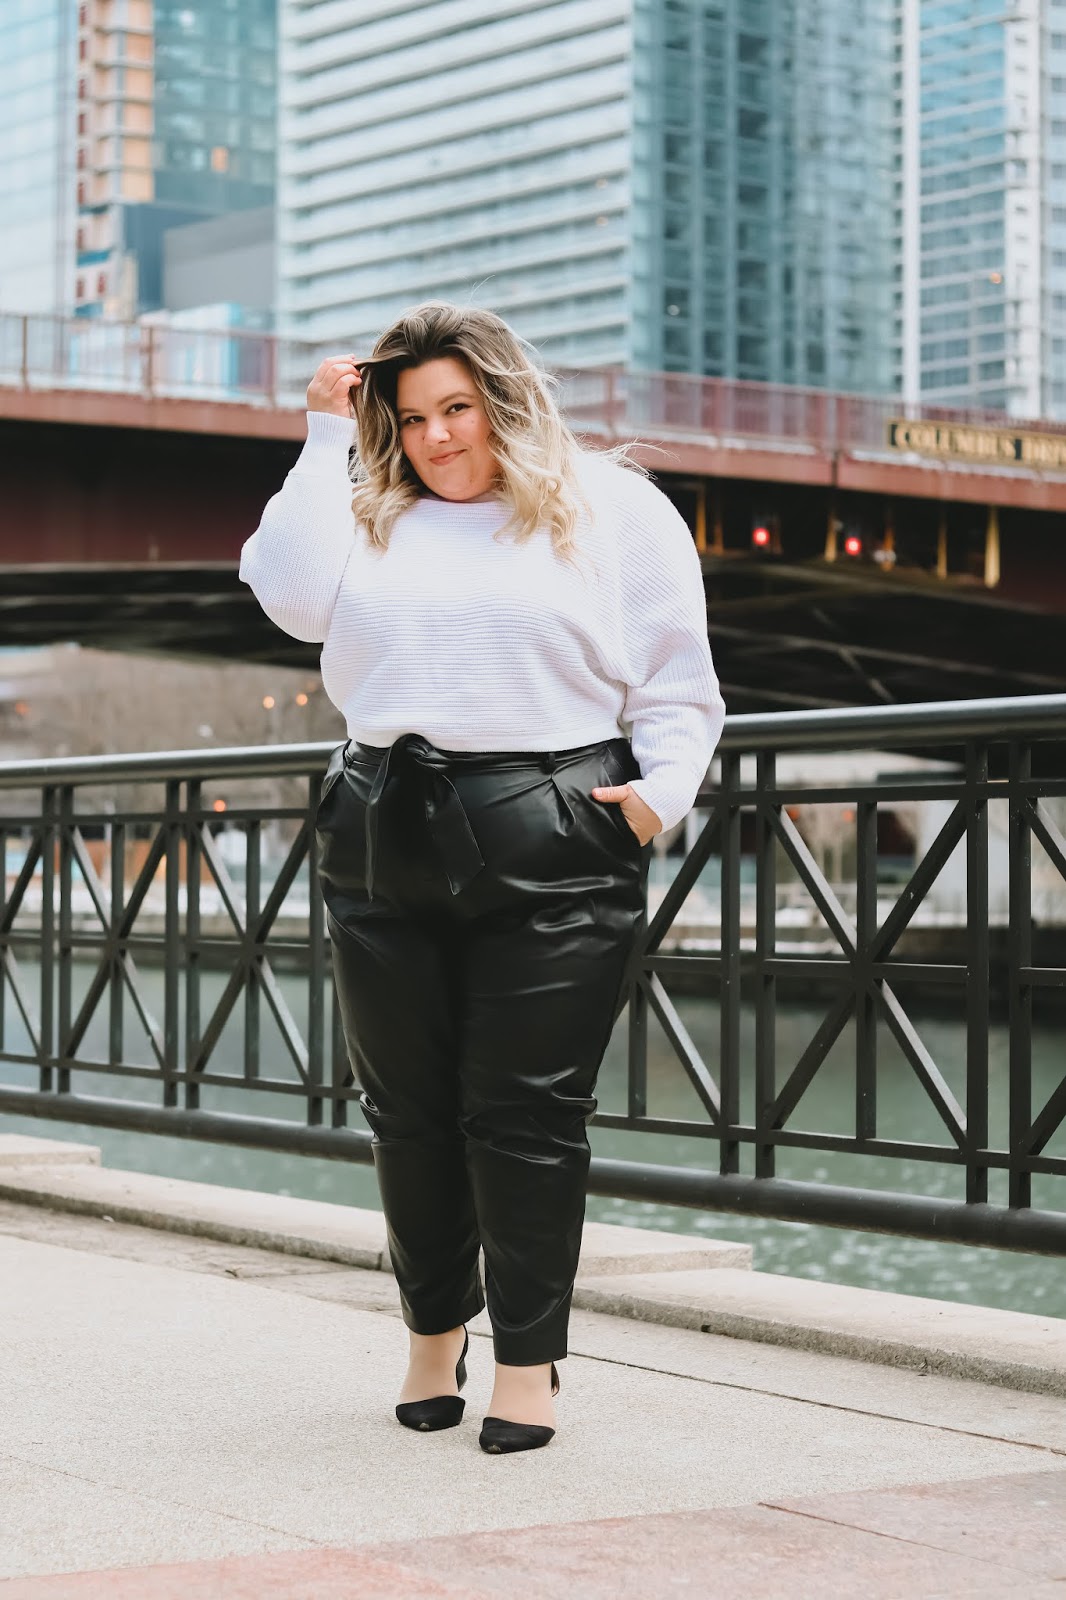 Chicago Plus Size Petite Fashion Blogger]Natalie in the City reviews Eloquii's Pleat Front Faux Leather Ankle Pants and White Cropped Sweater.